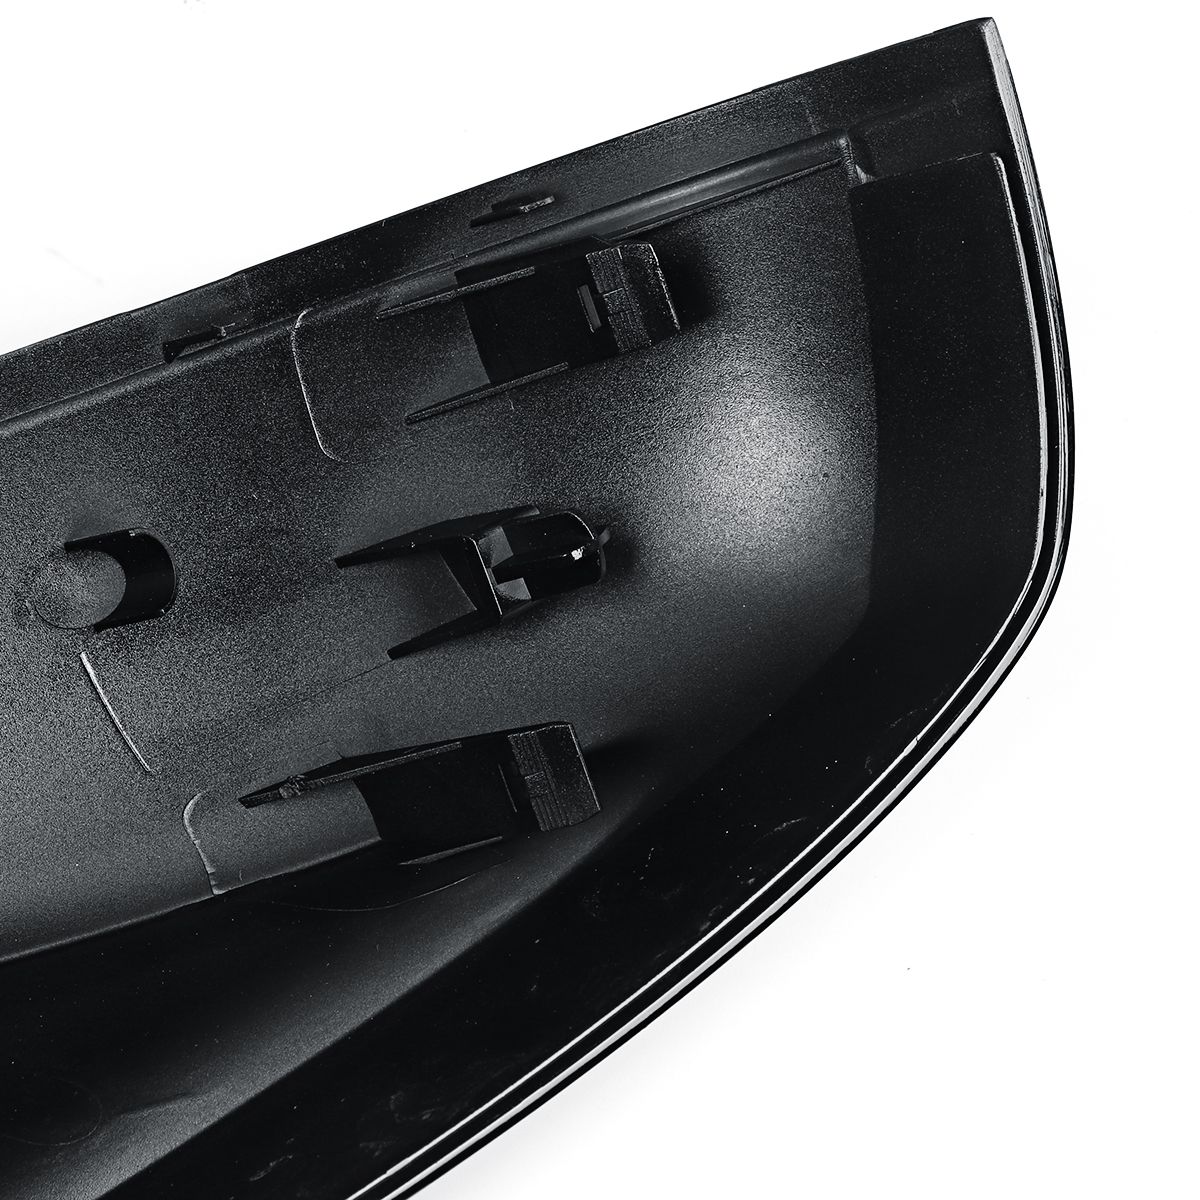 Glossy-Black-M-Style-Rear-View-Mirror-Cap-Cover-Replacement-Pair-For-BMW-X5-X6-E70-E71-2007-2013-1727293